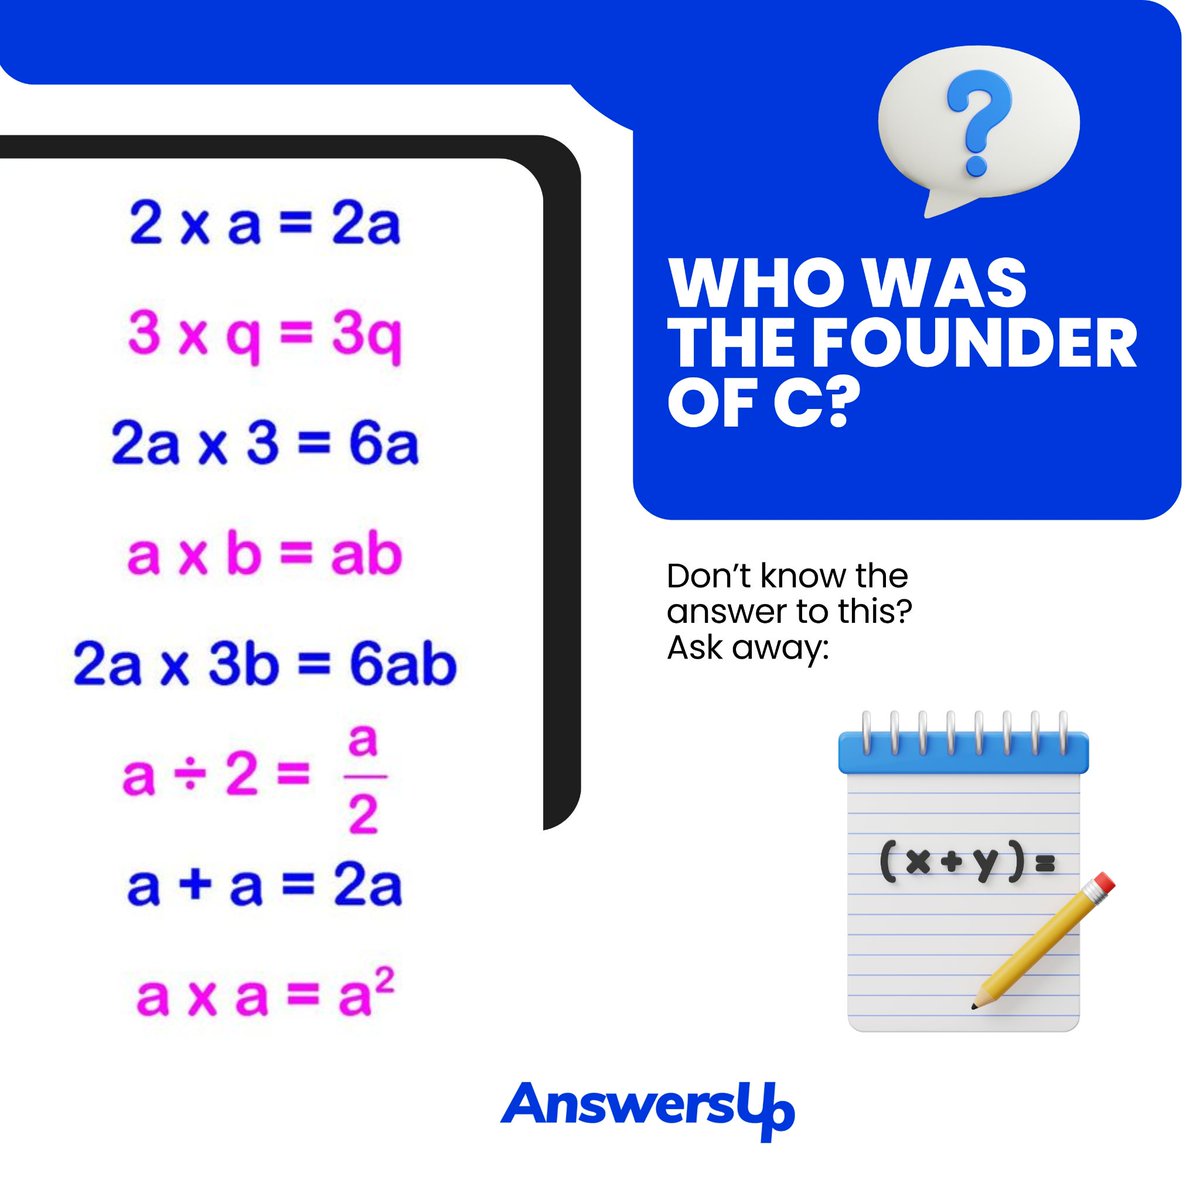 who was the founder of Algebra? 
.
Don’t know the answer to this? Ask away:   answersup.com 
.
If you do. Answer rn!  
.
#AnswerUp #algebra #history #mathematics #maths #learnmath #learnalgebra #historyofmaths #algebraic #algebraicexpression #mathematicians #math